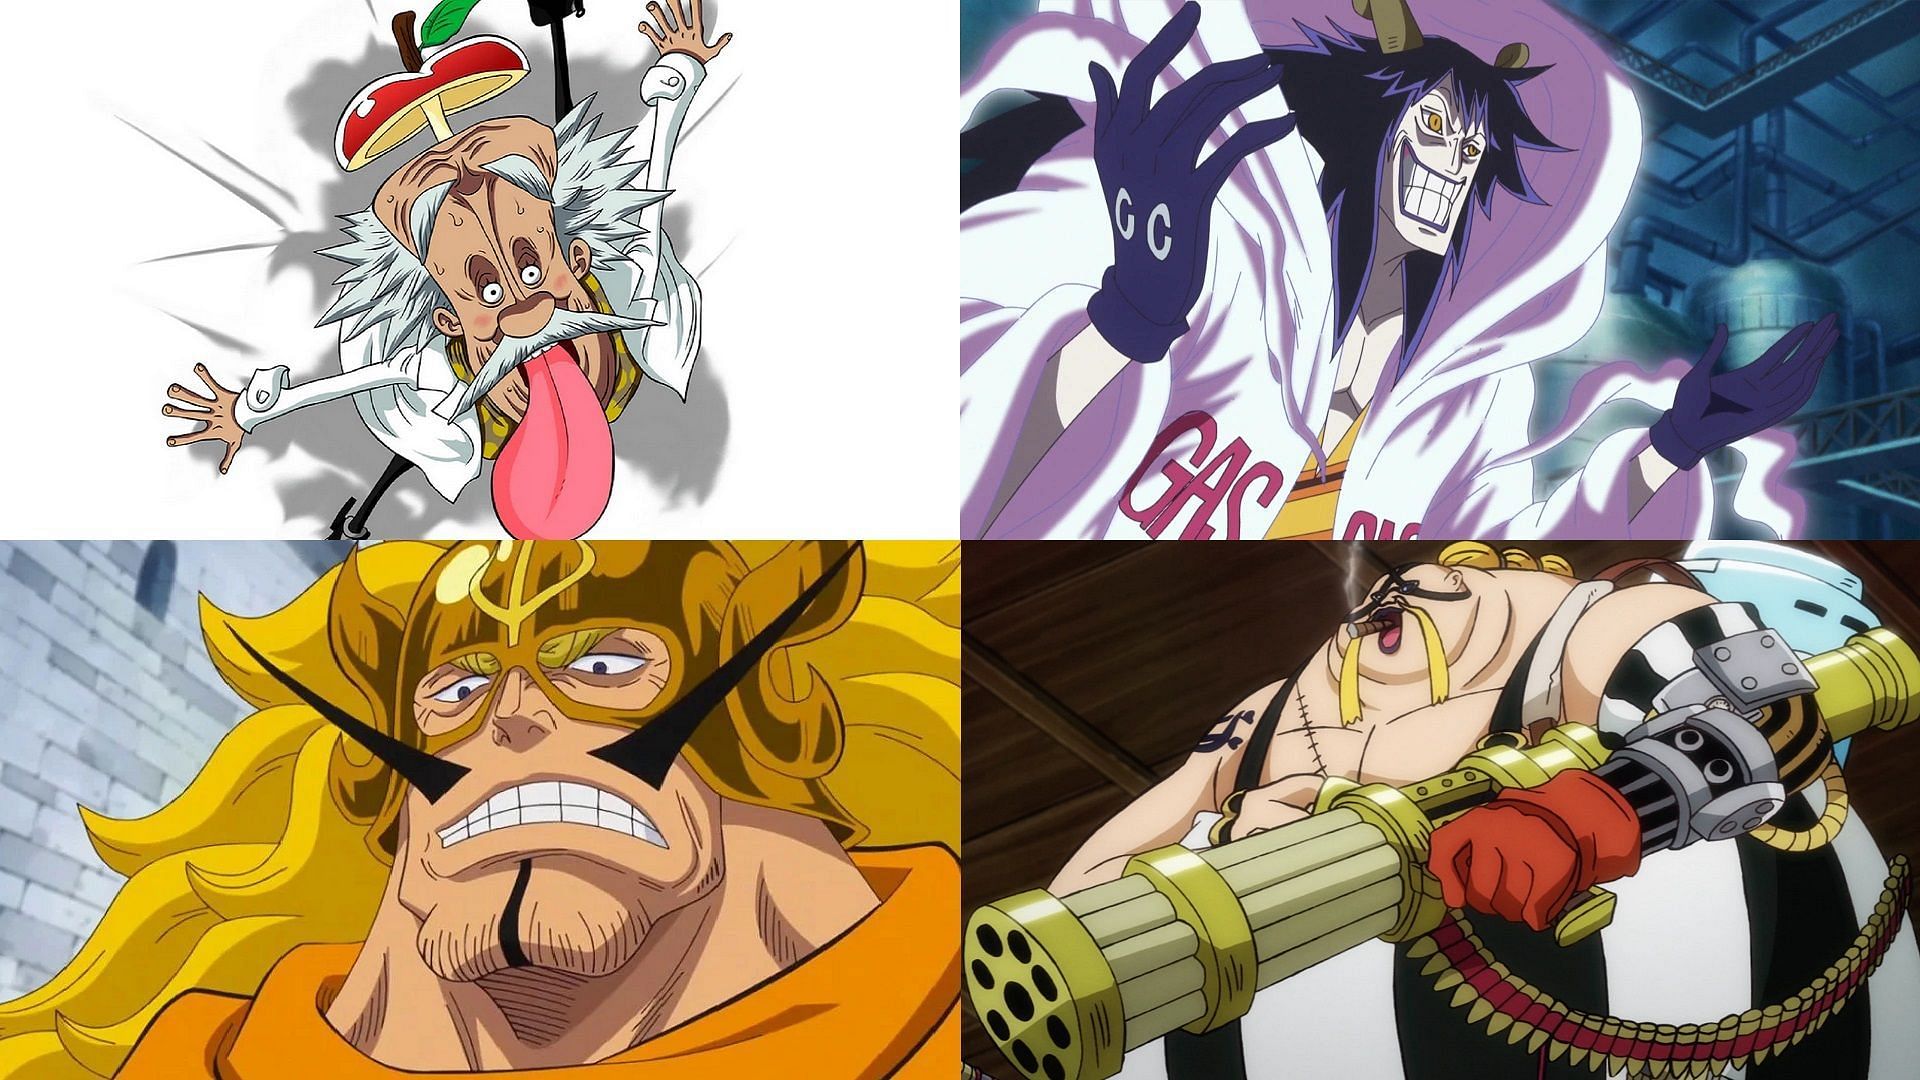 Before One Piece 1070, four members of MADS were known: Vegapunk, Caesar Clown, Judge, and Queen (Image via Toei Animation)